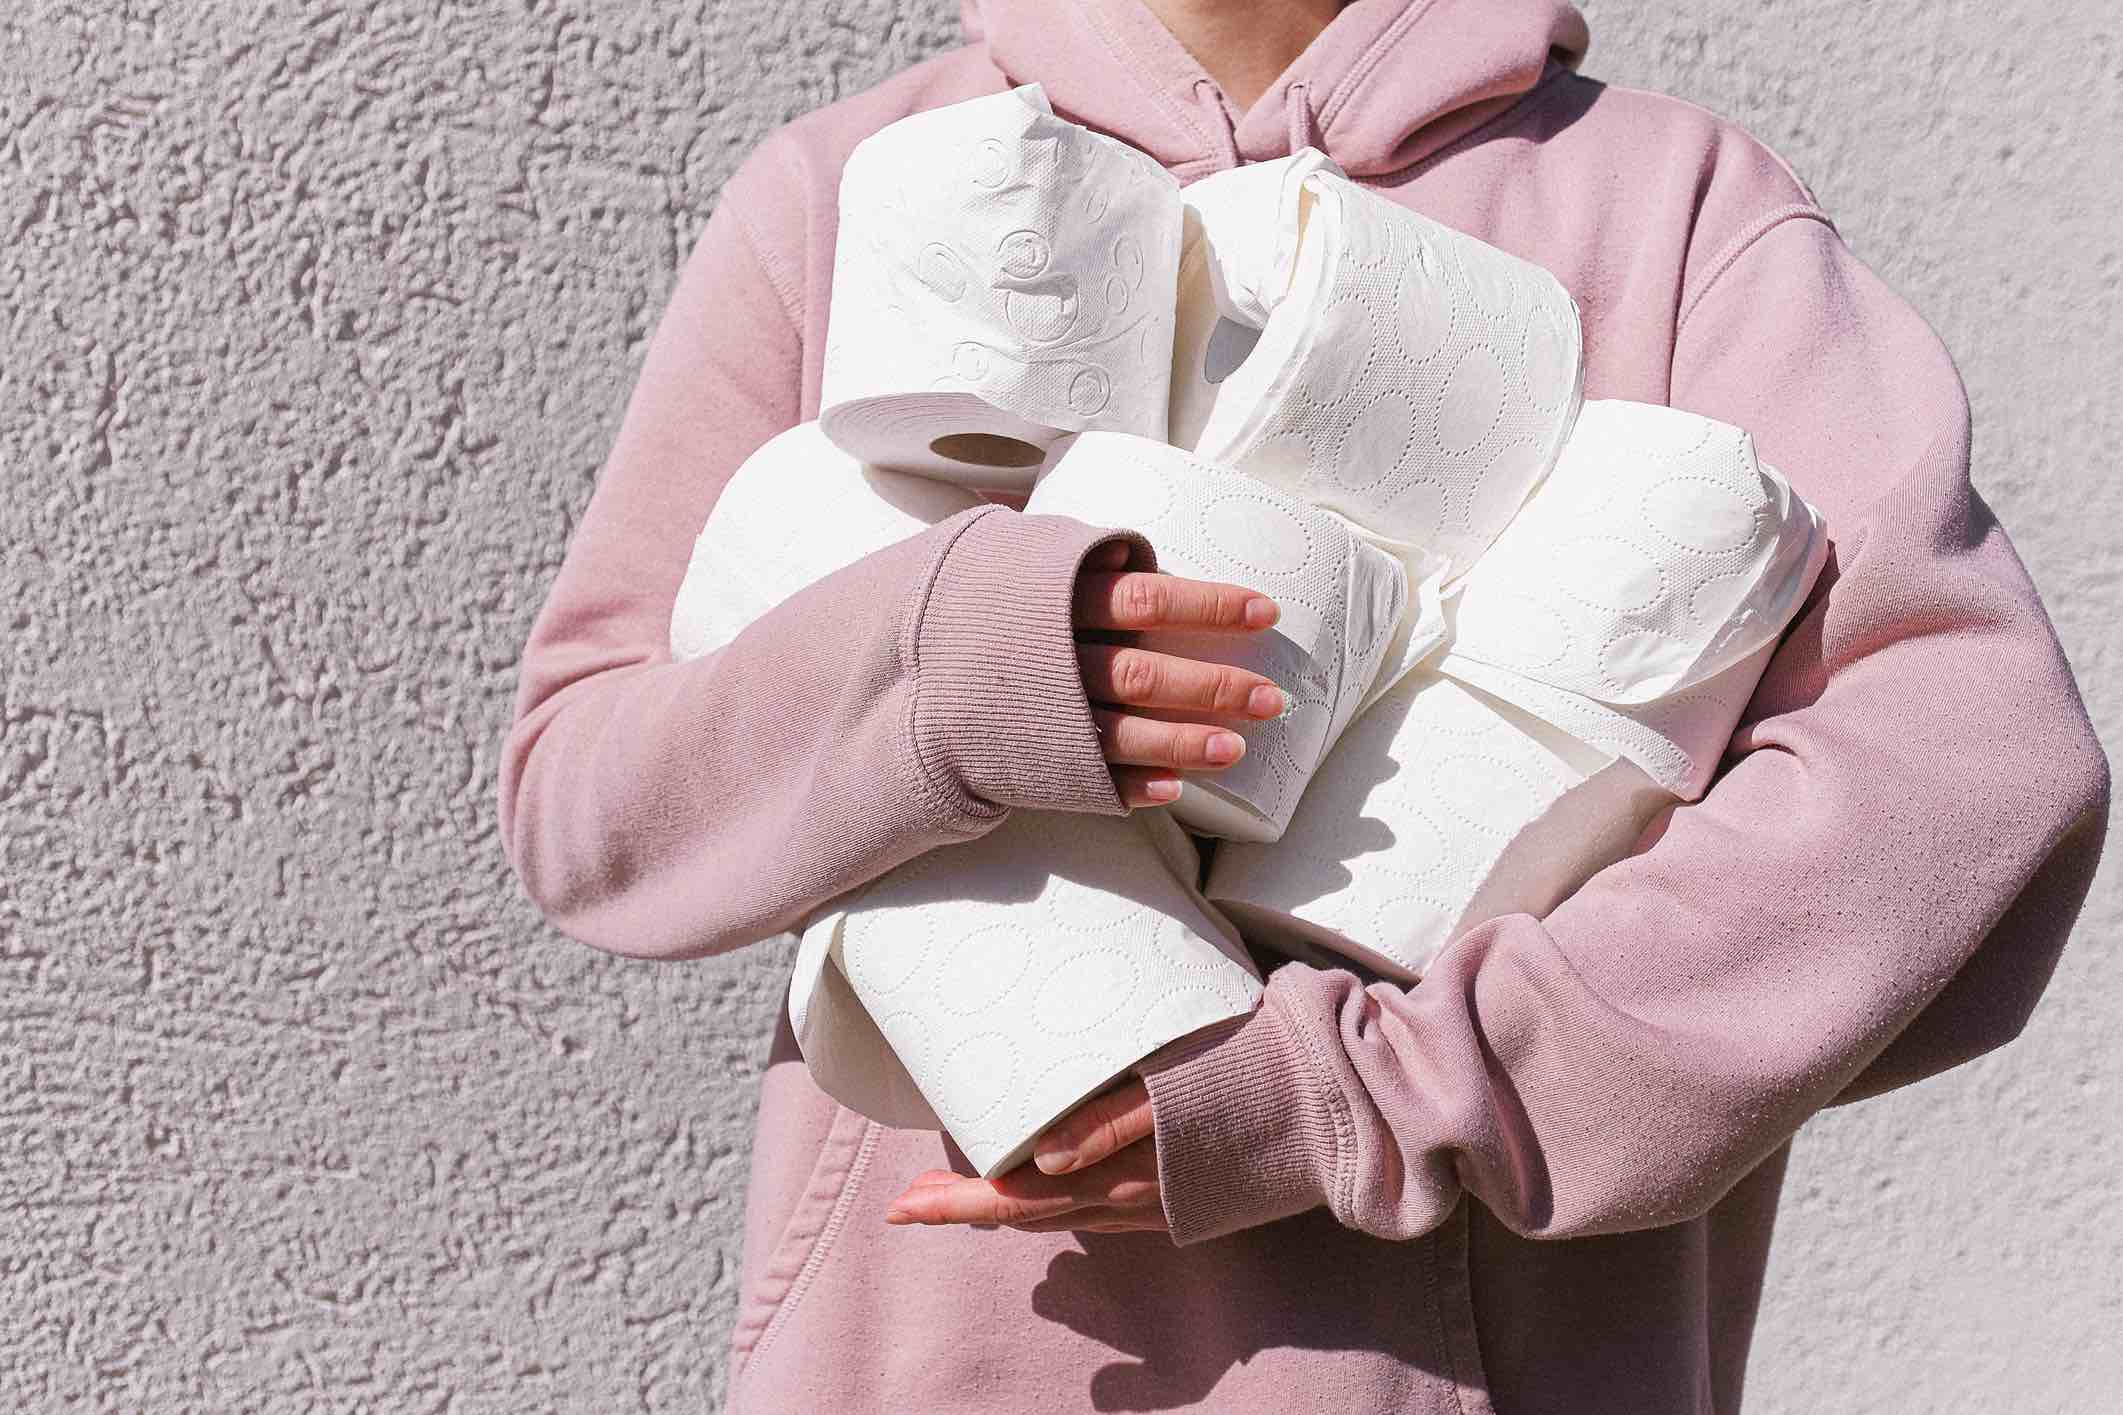 Woman carries several rolls of toilet paper